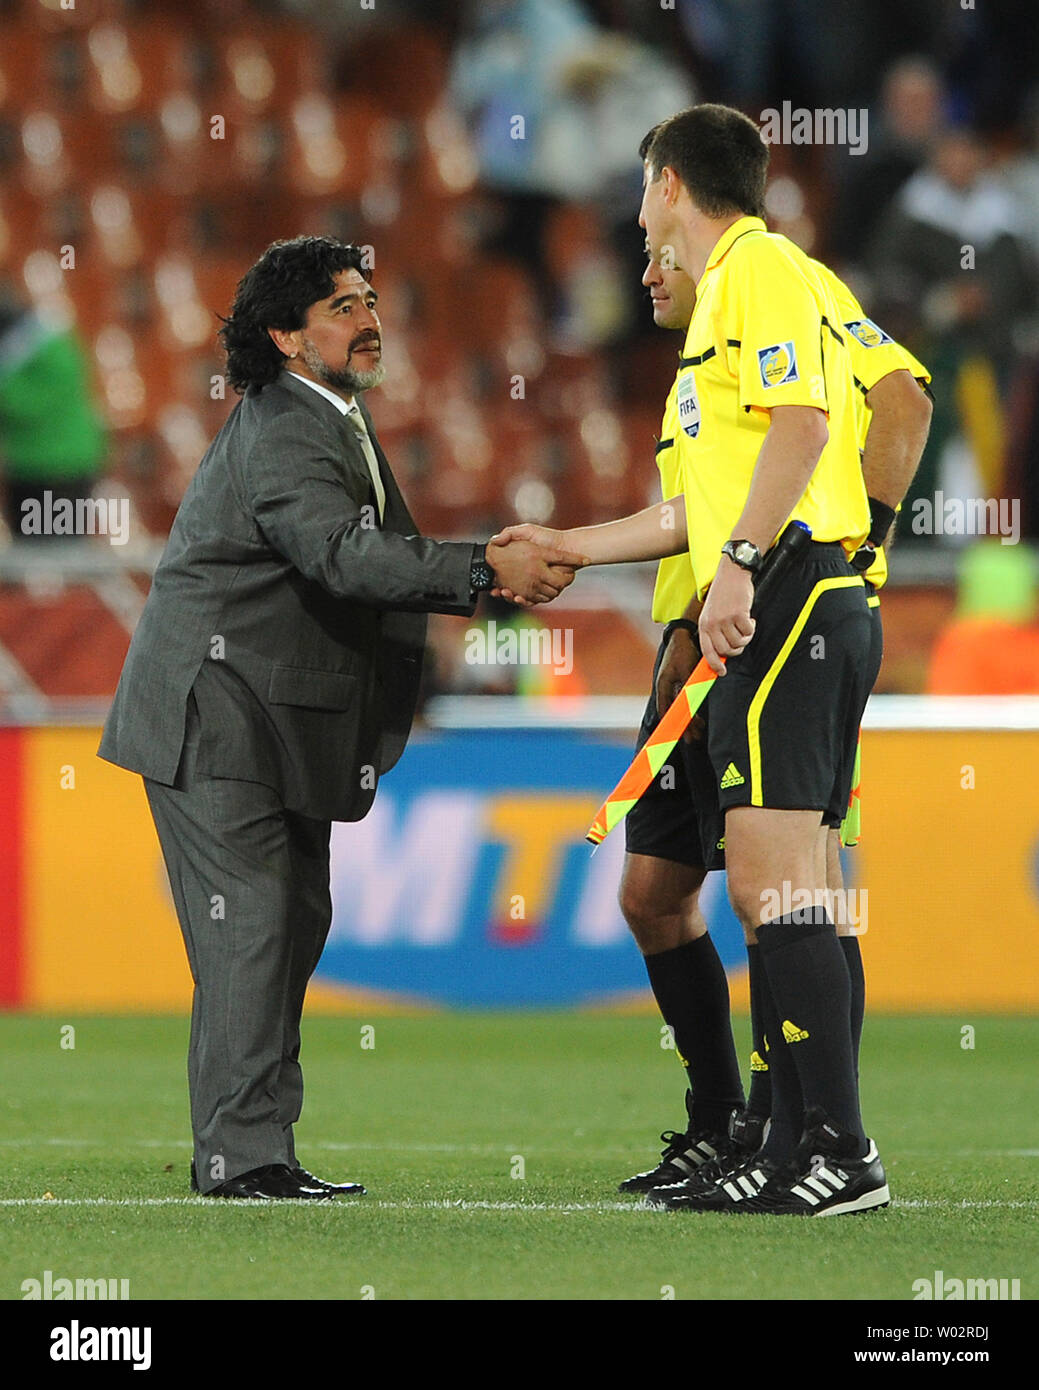 Argentina manager Diego Maradona shakes hands with the officials after the Group B match at the Peter Mokaba Stadium in Polokwane, South Africa on June 22, 2010. UPI/Chris Brunskill Stock Photo